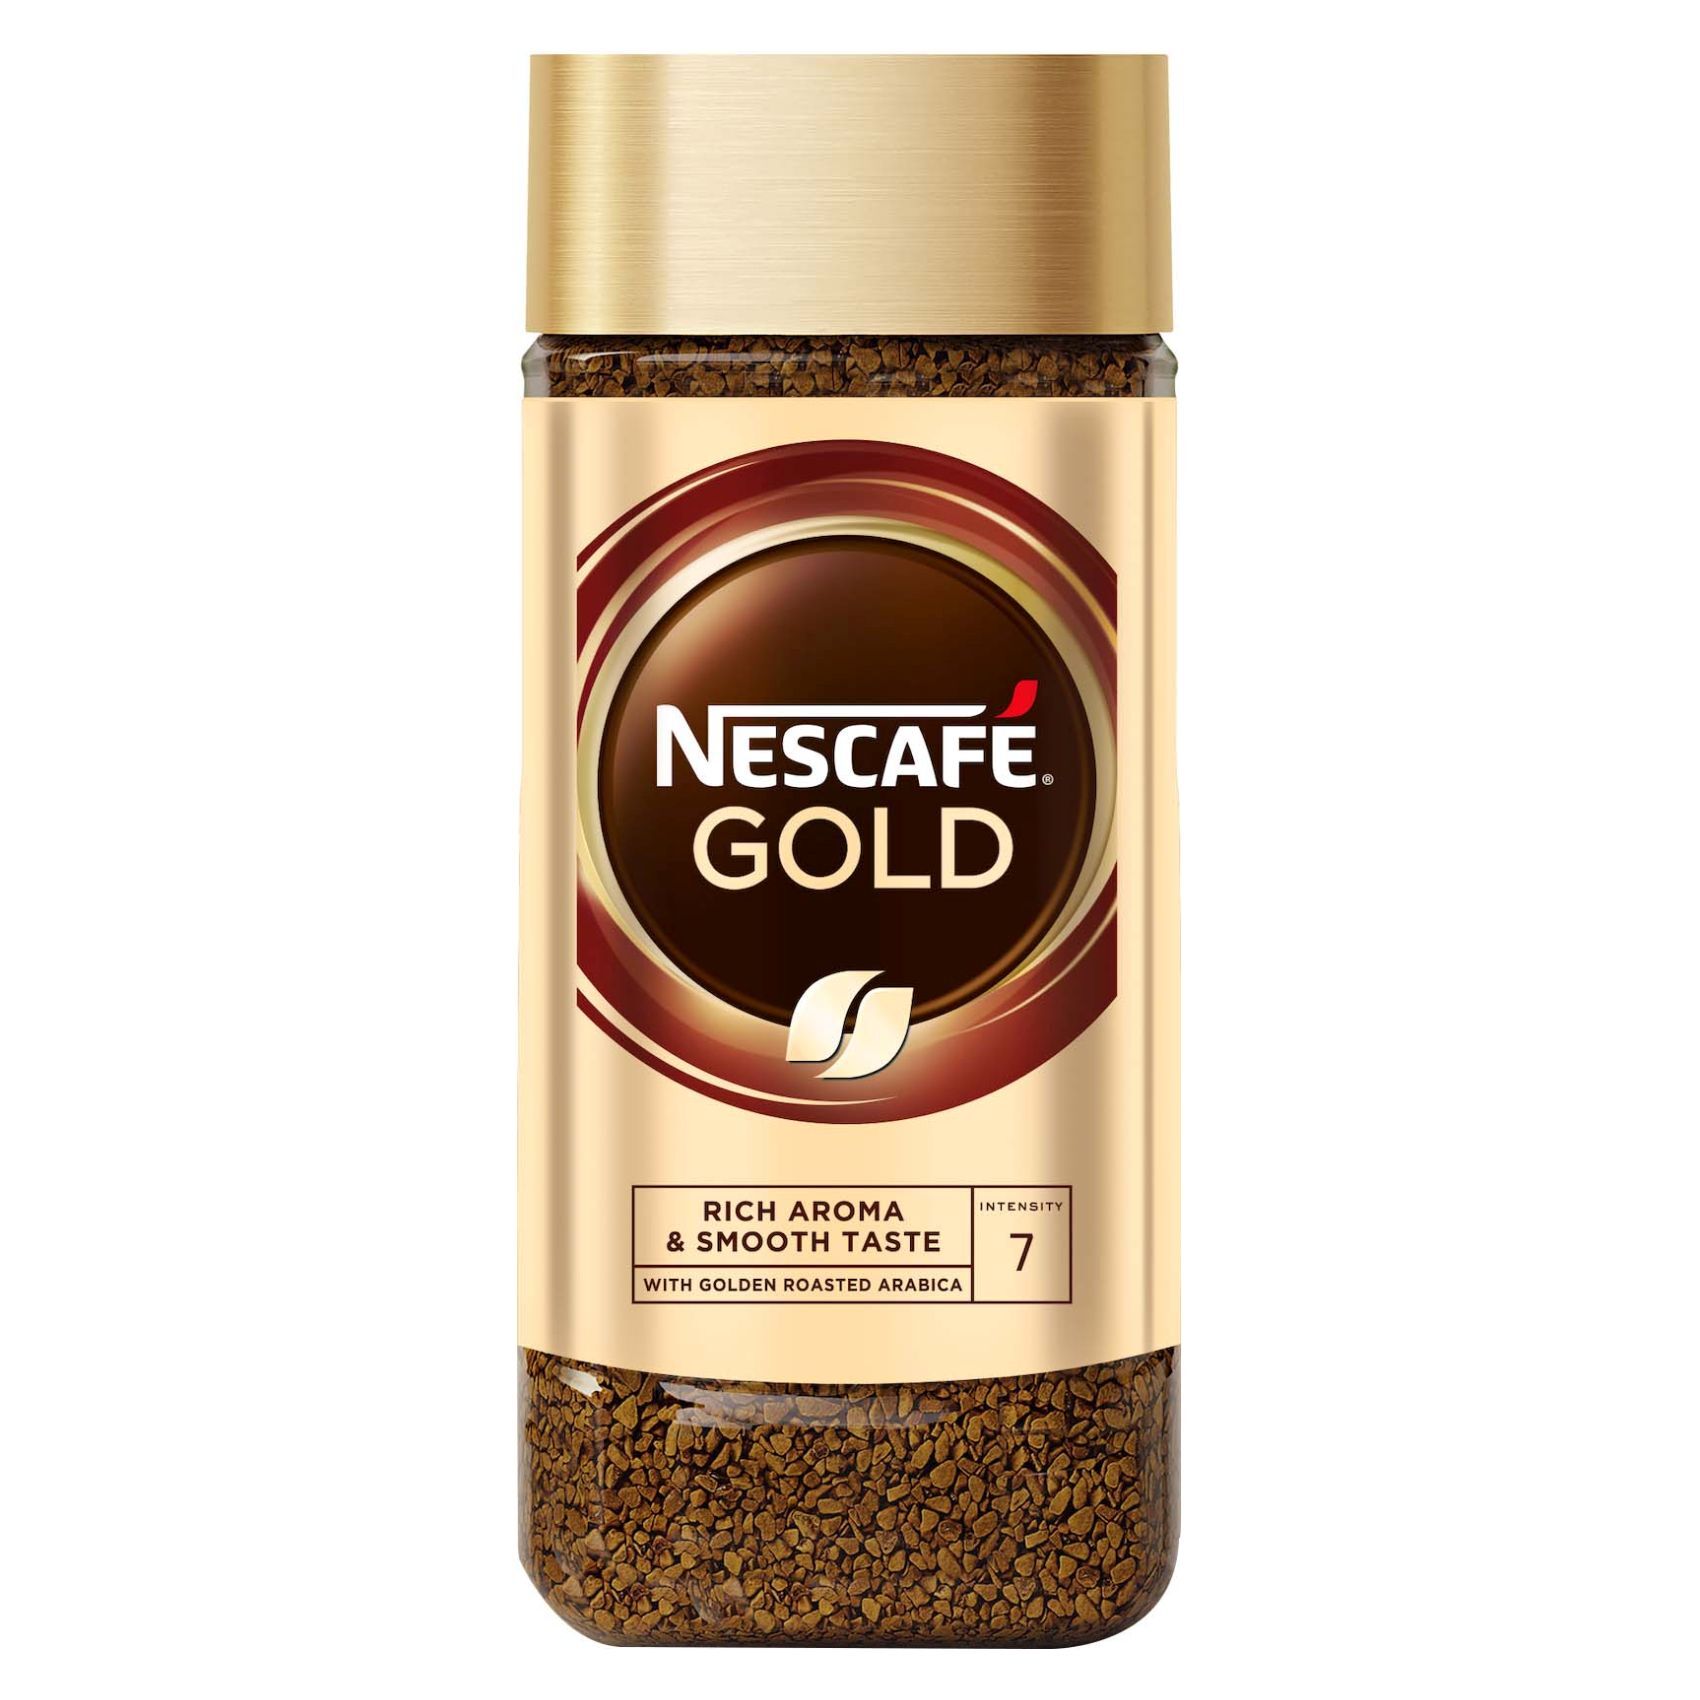 Nescafé 3 in 1 Classic 30 Sachets , 600g Instant Coffee Price in India -  Buy Nescafé 3 in 1 Classic 30 Sachets , 600g Instant Coffee online at